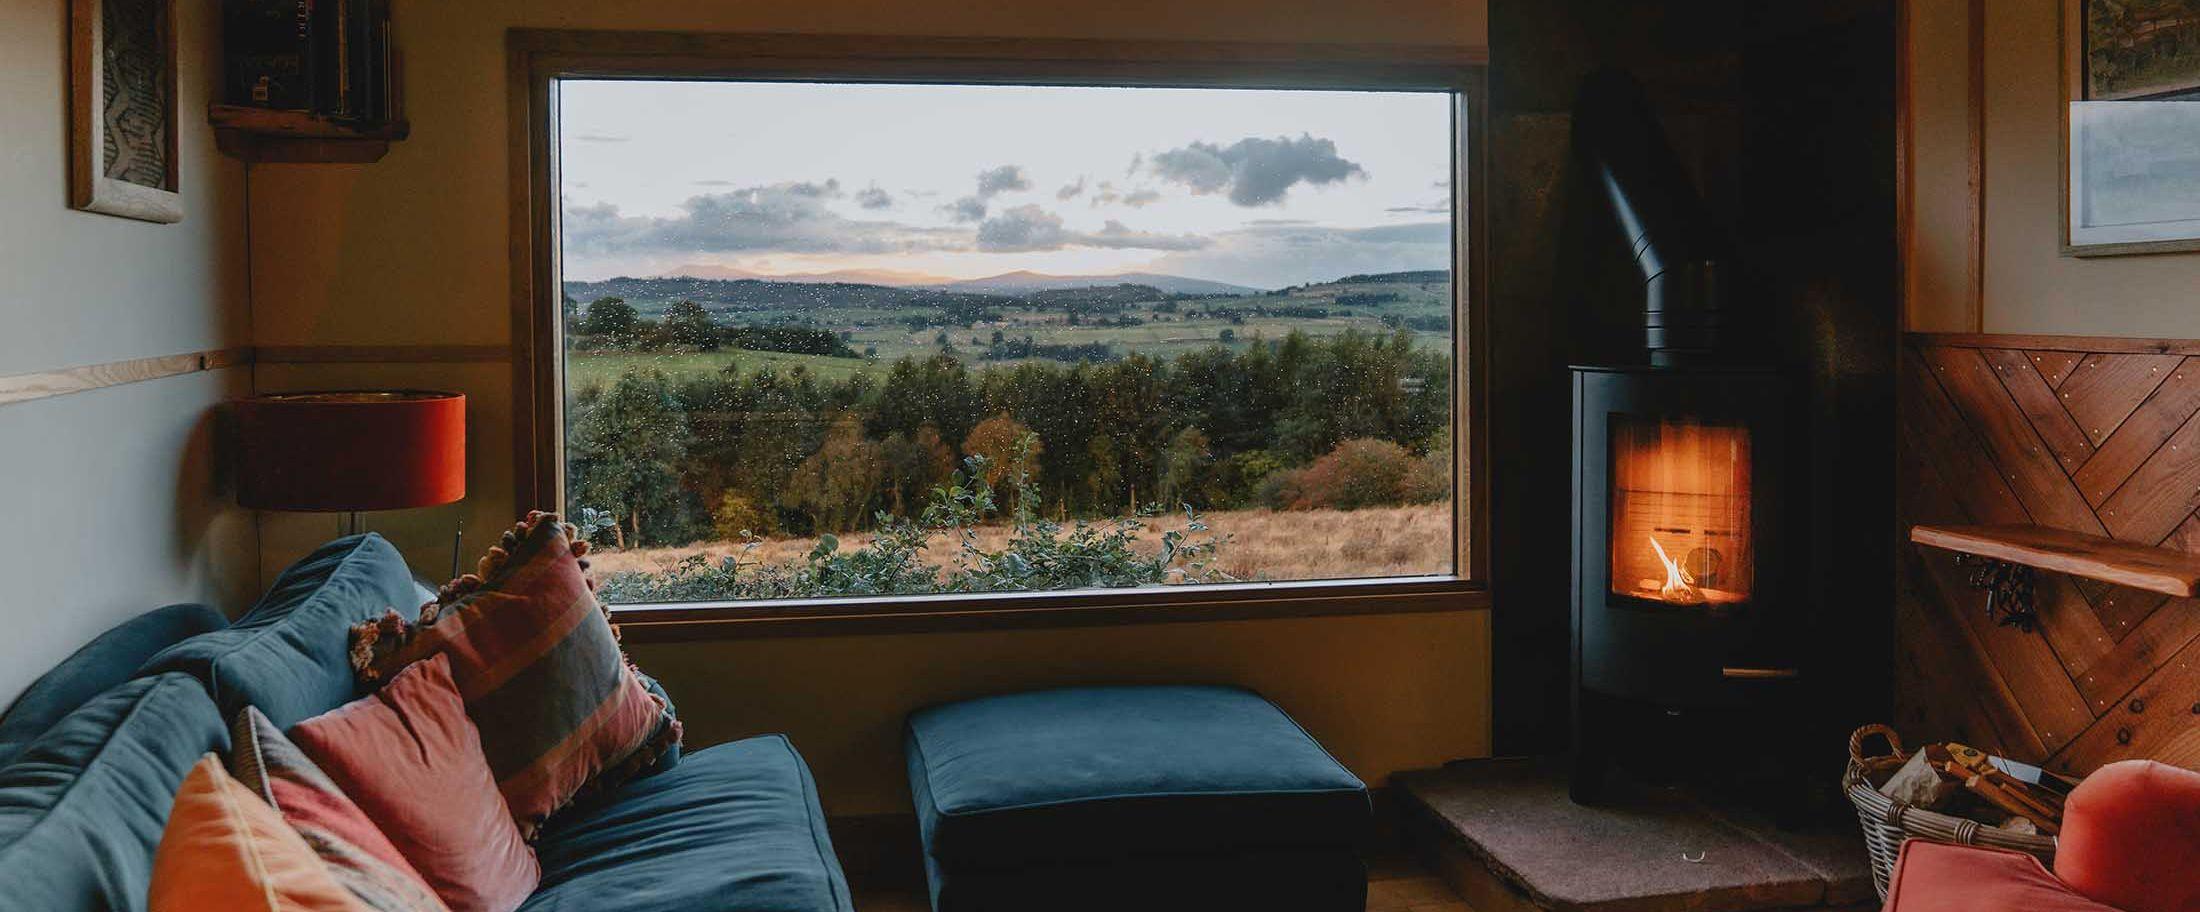 Wood burner in a cabin with a sofa and a window overlooking a forest